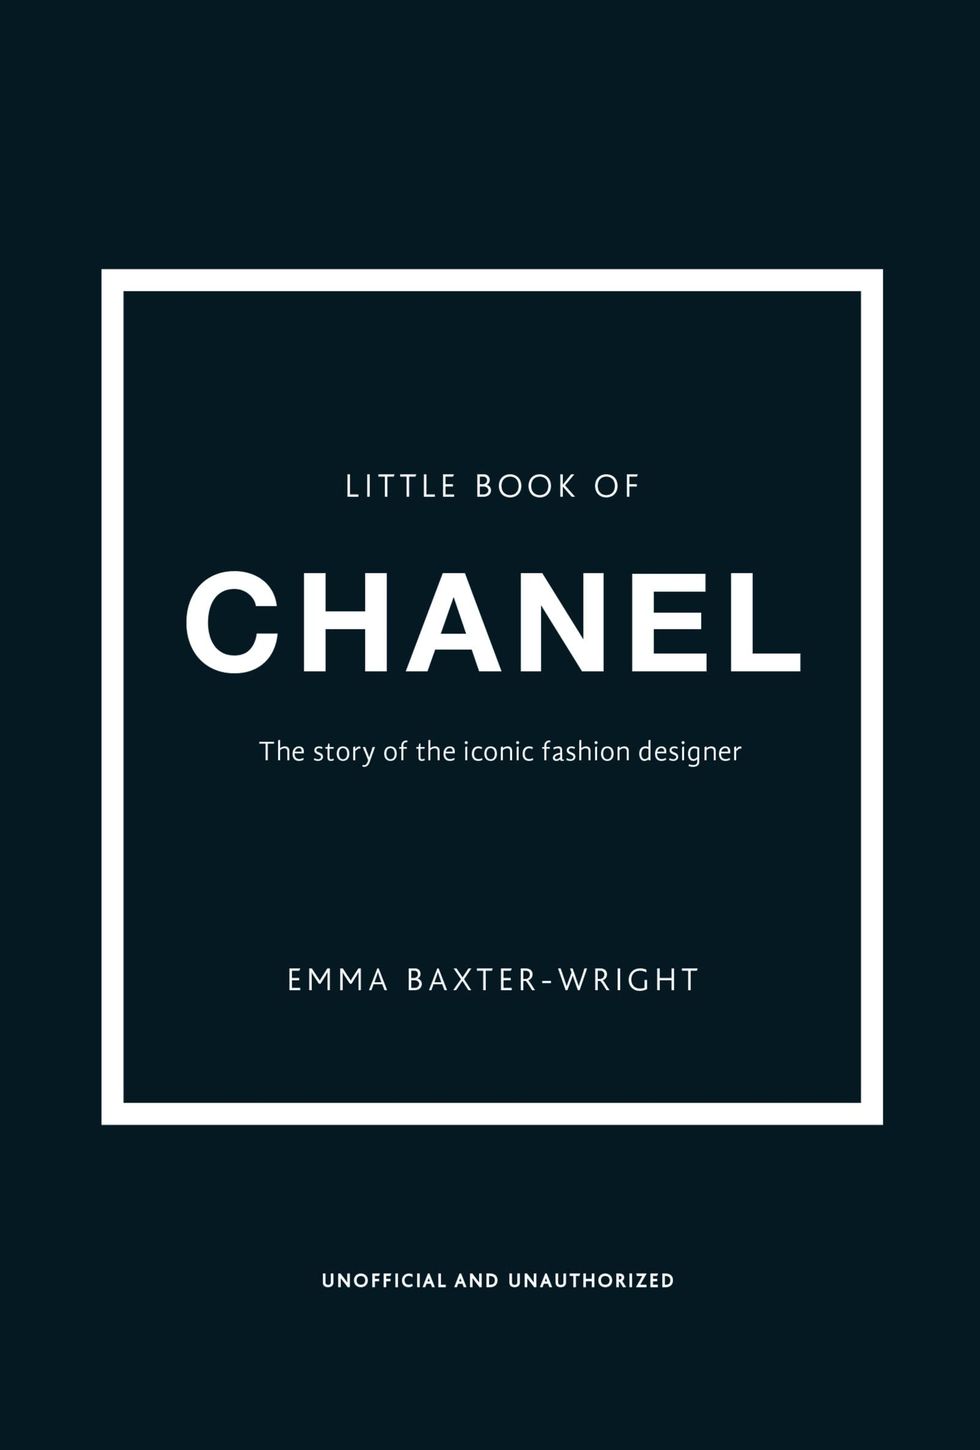 Little Book of Chanel: New Edition: 3 (Little Book of Fashion)